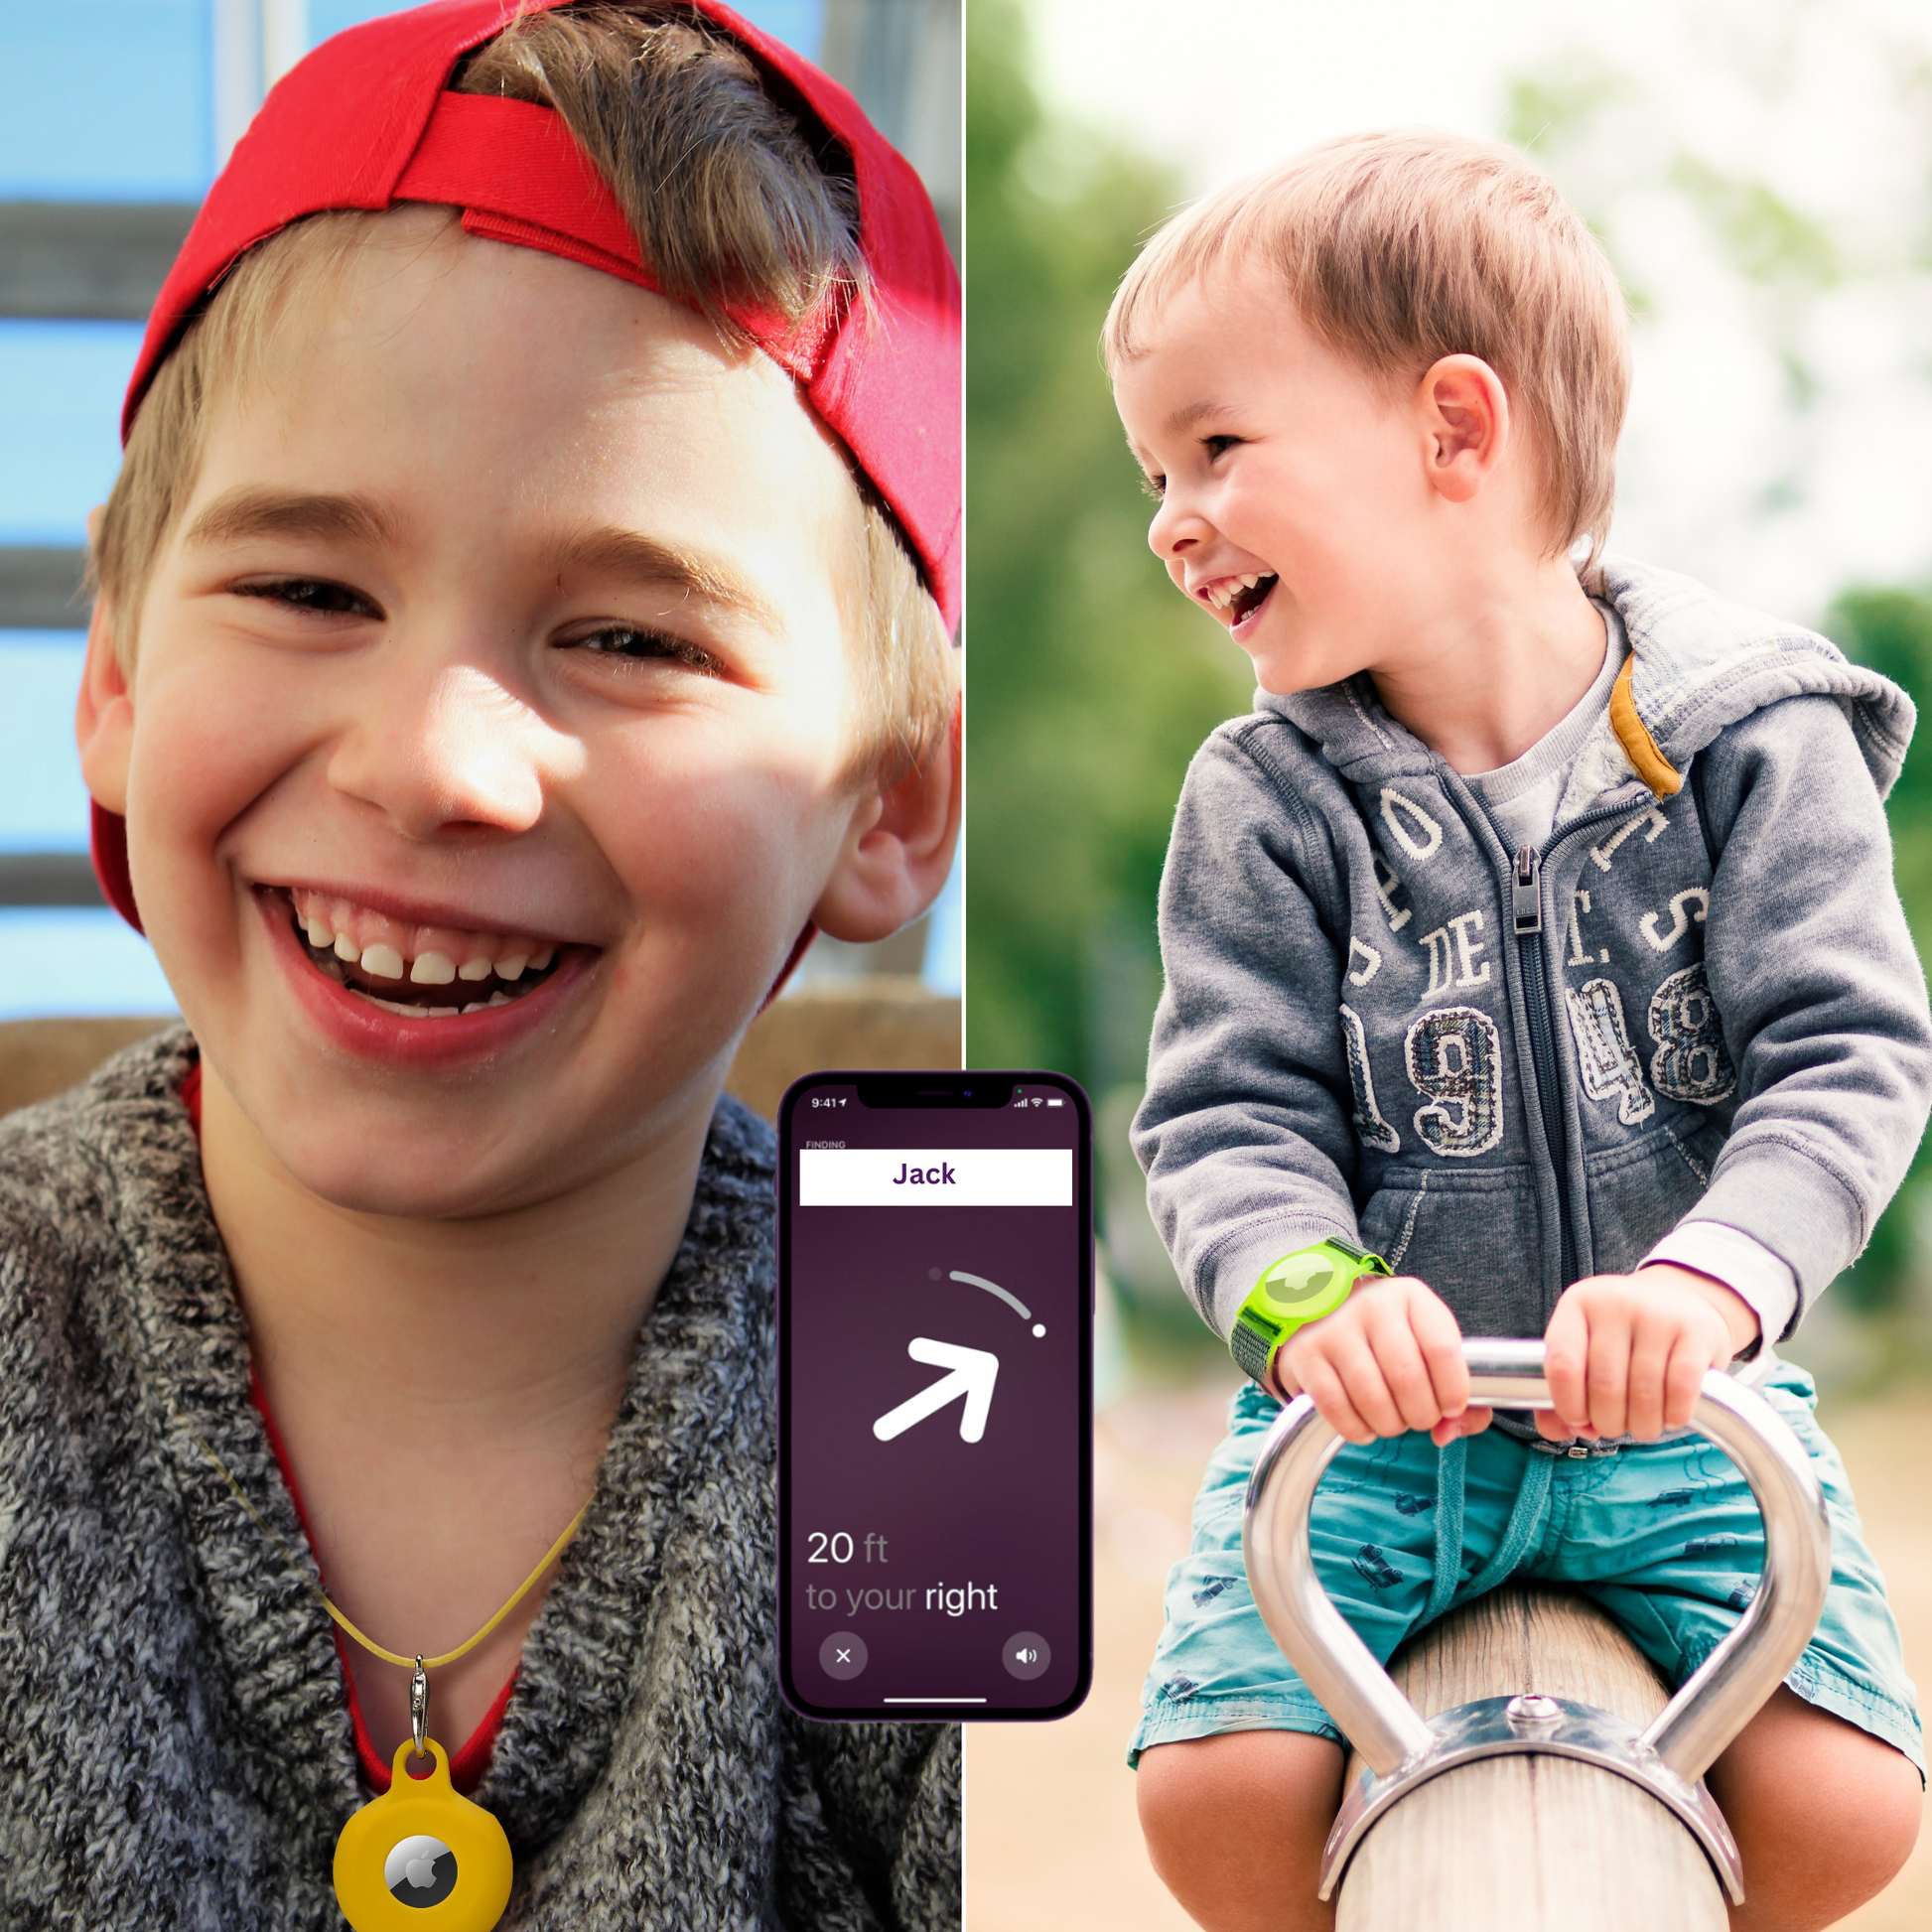 Apple-airtag-accessories-for-kids-airtag-bracelet-necklace-for-kids